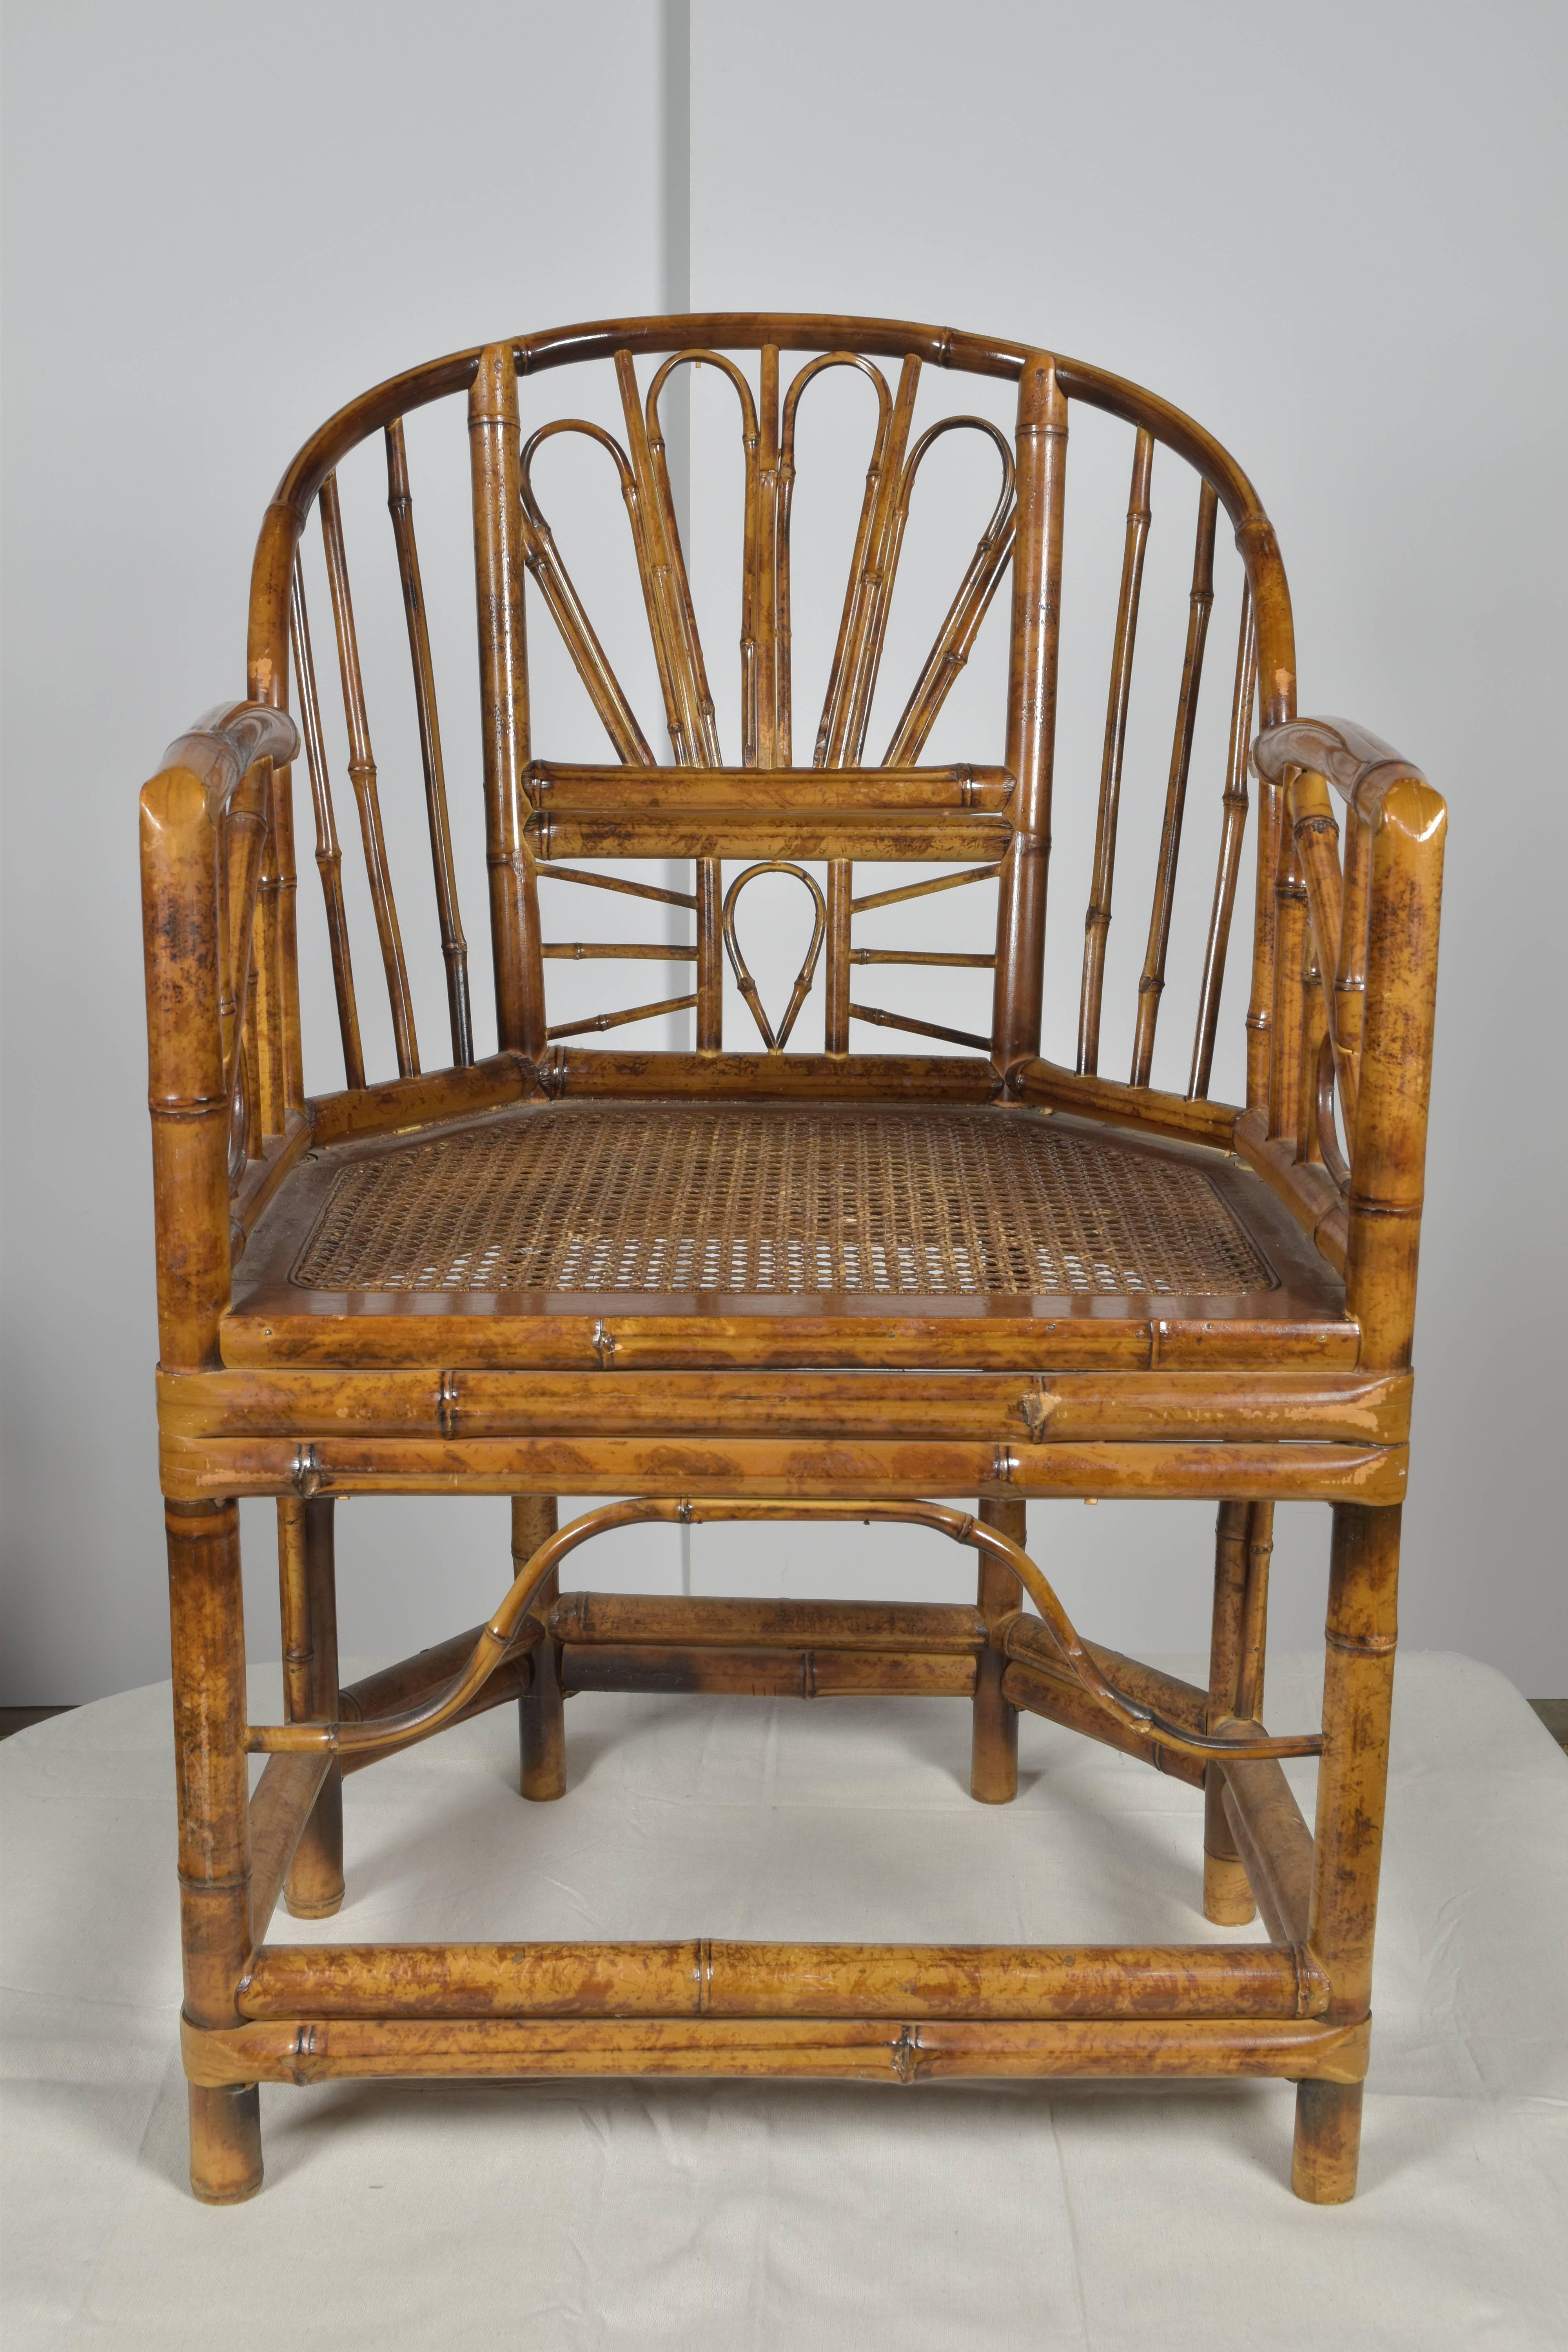 bamboo chair vintage